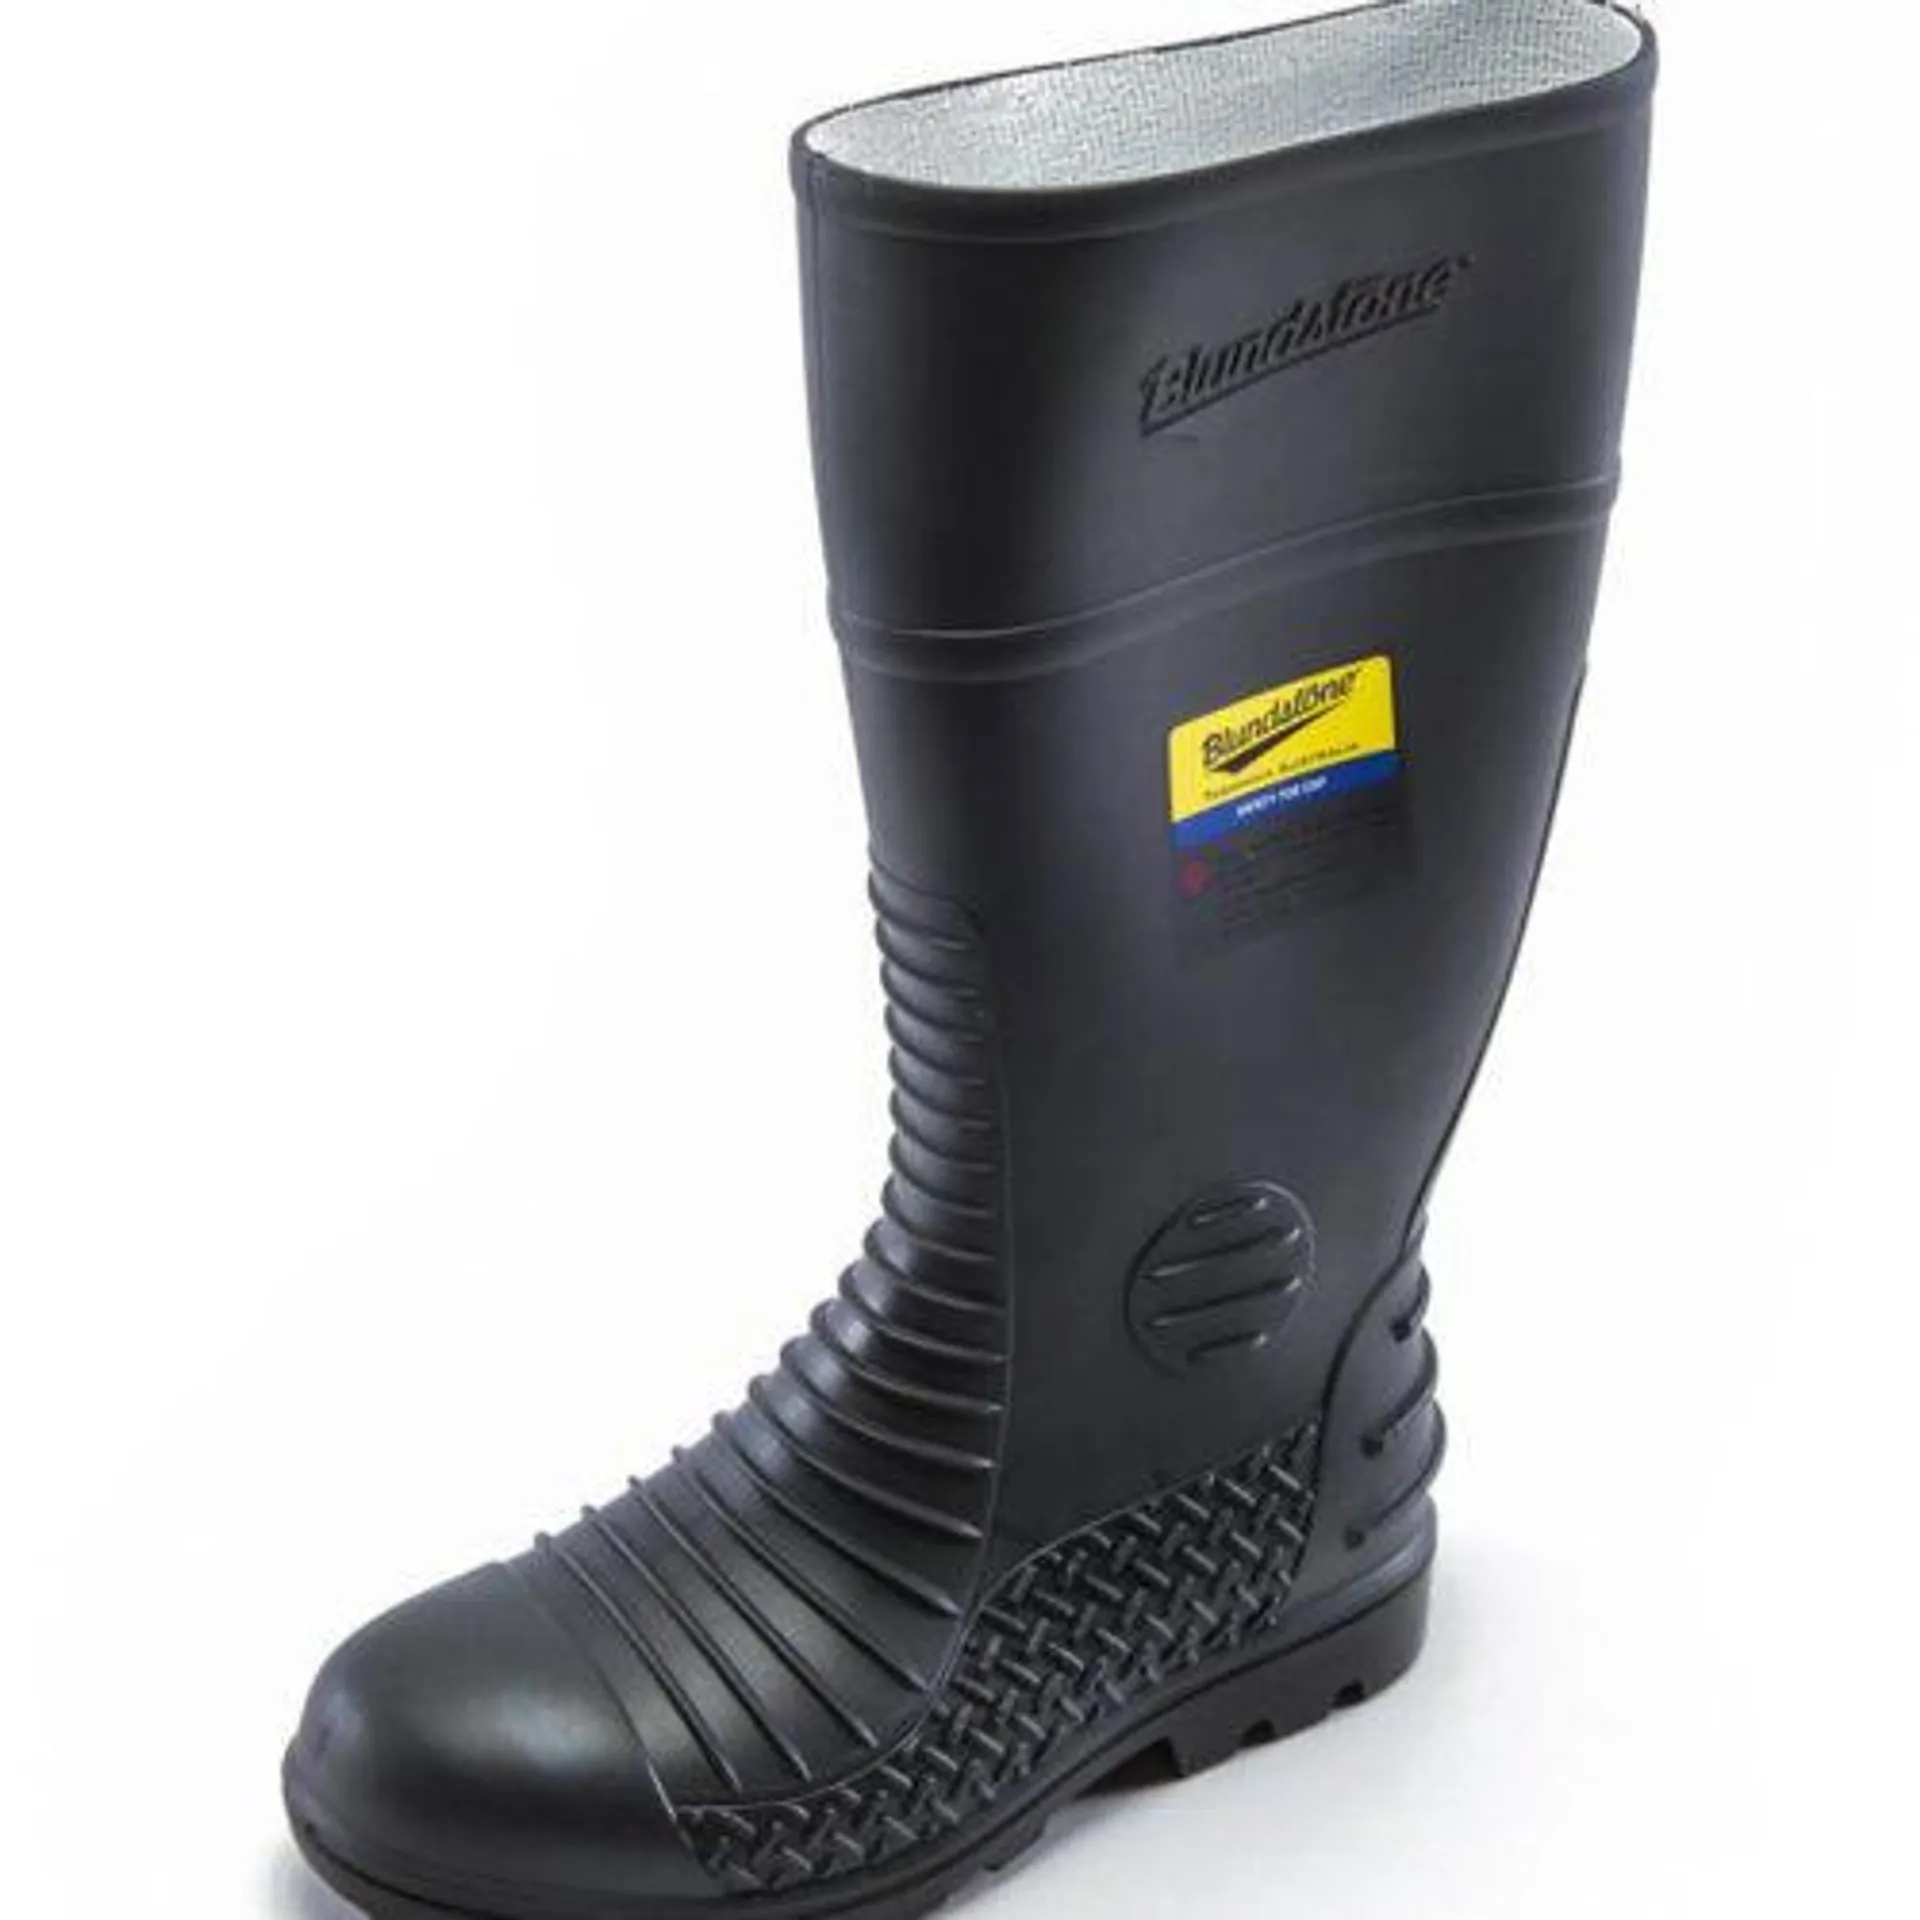 Blundstone Style 025 Waterproof Safety Gumboots